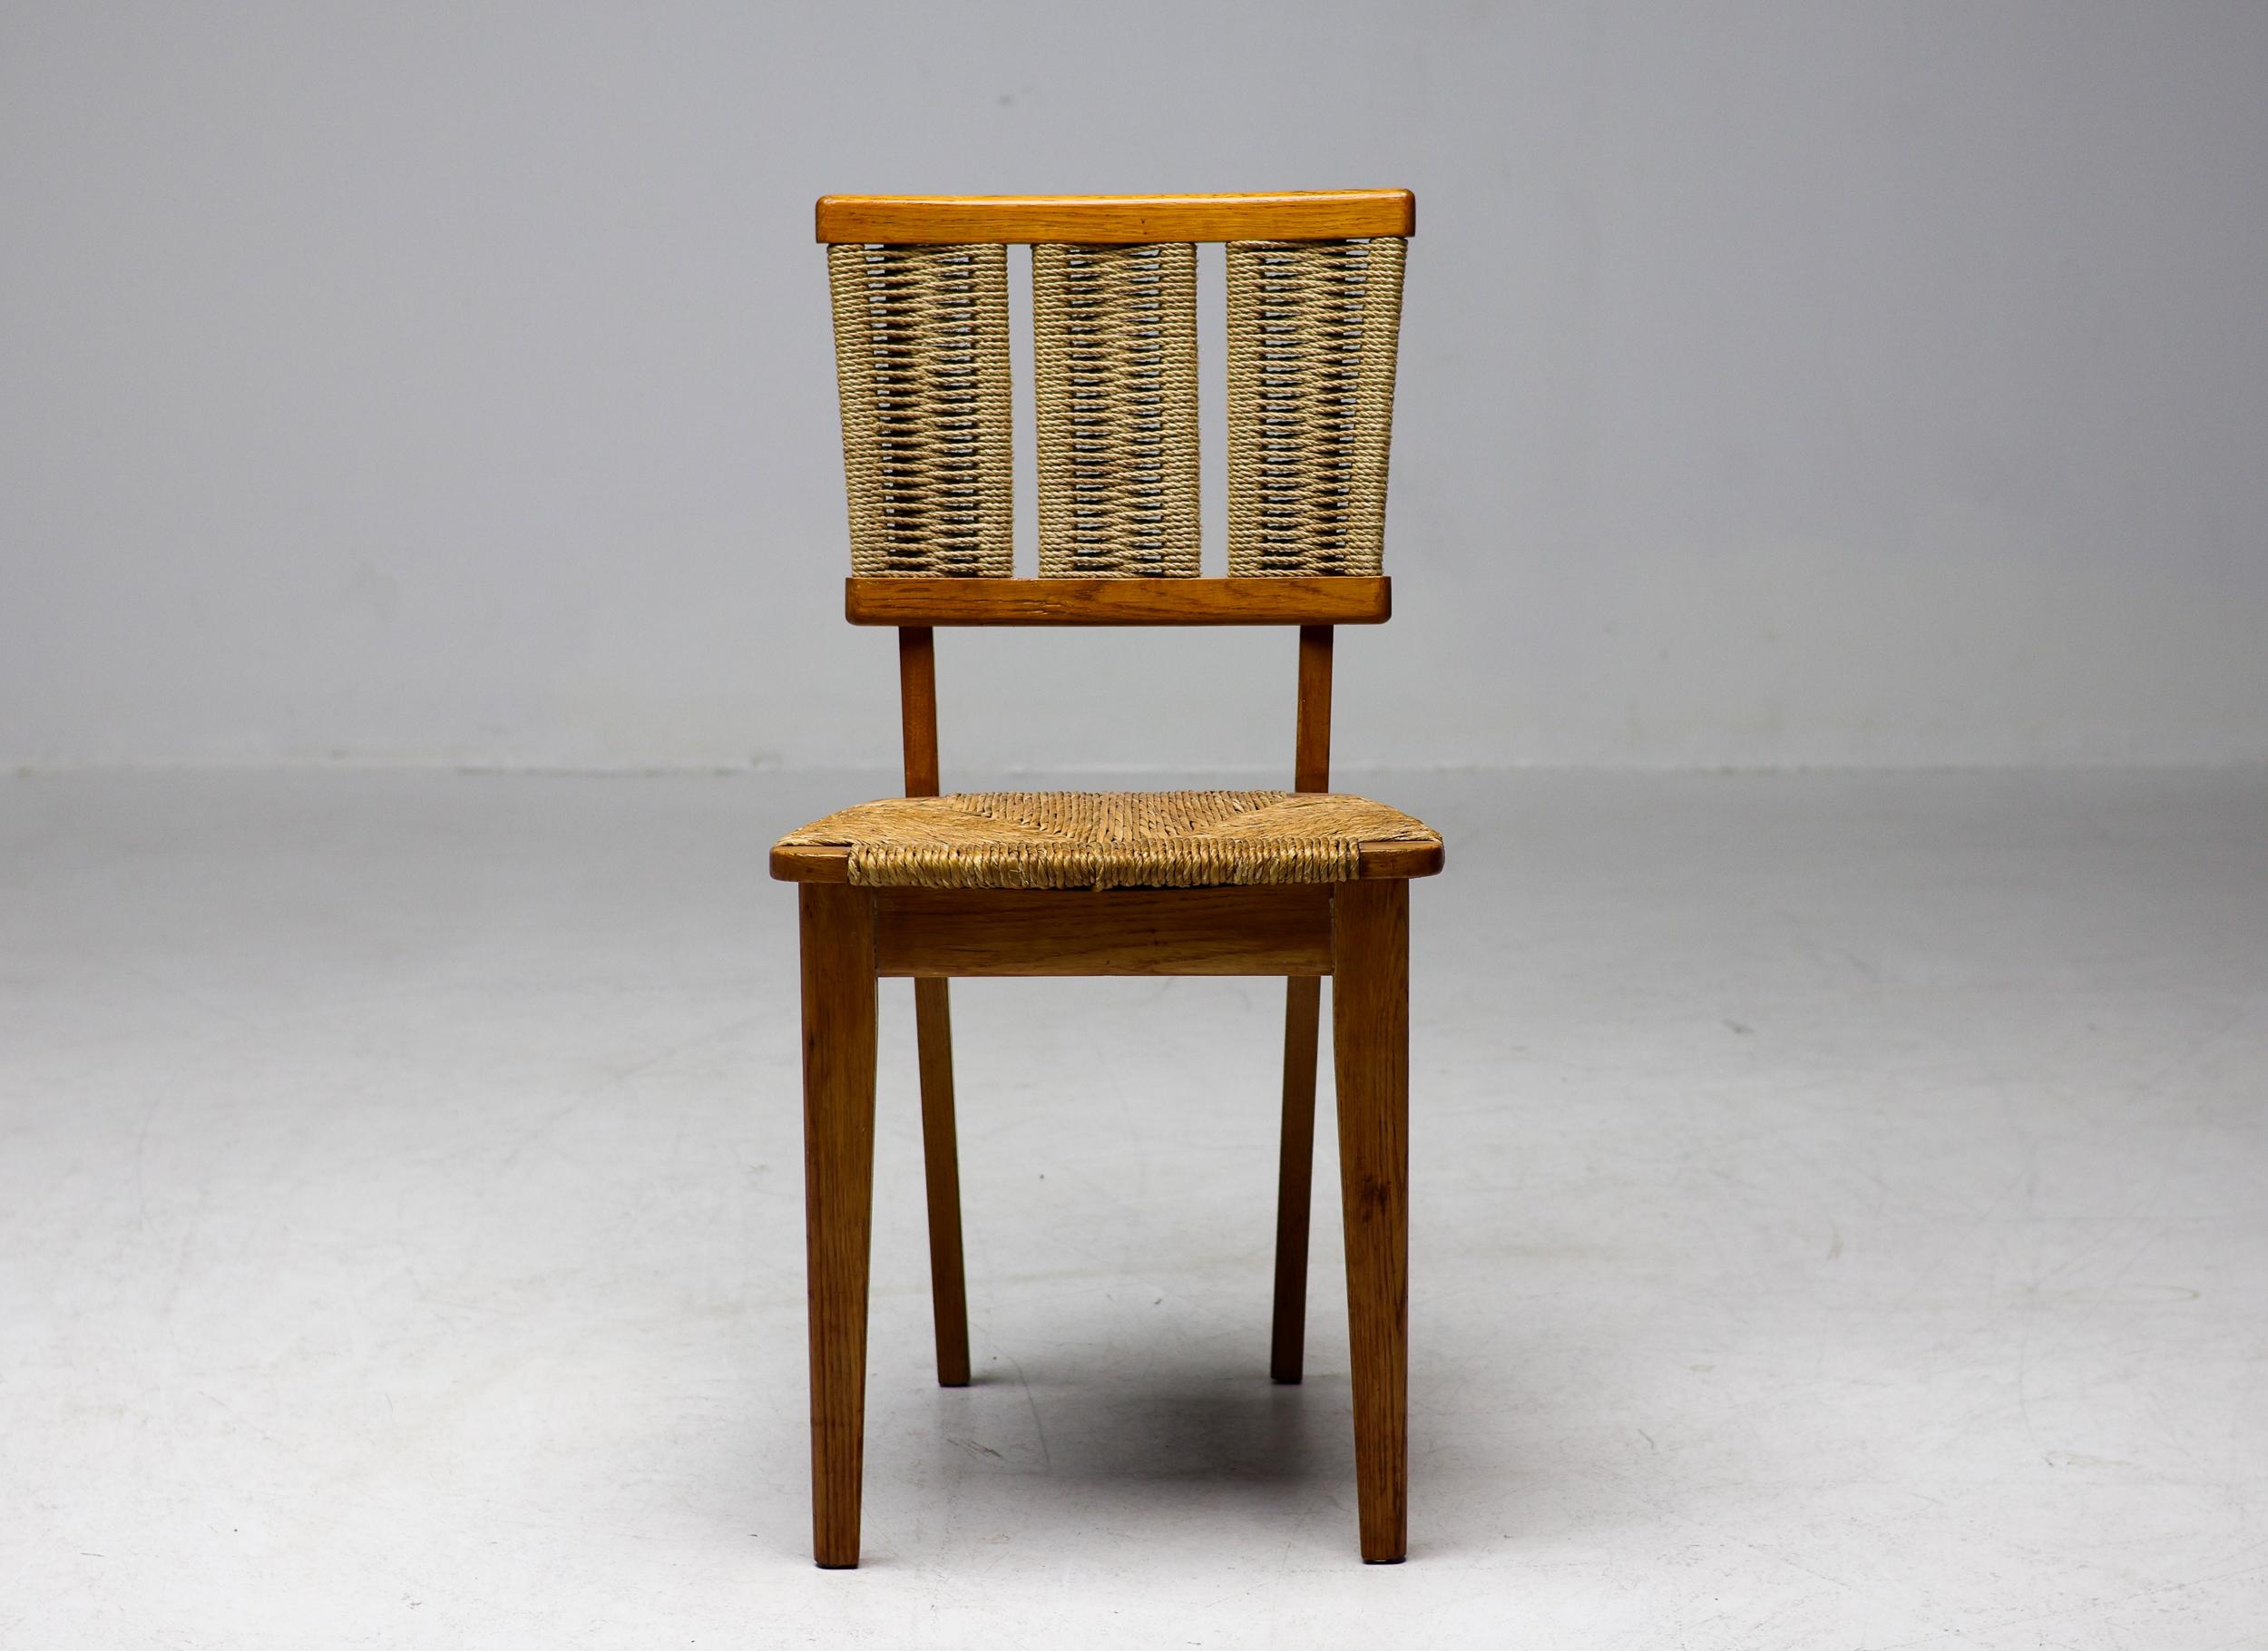 Mart Stam model 'A2-1', oak, rush and rope, The Netherlands, 1948.  
Executed in 1948, this dining chair by Dutch modernist designer and architect Mart Stam (1899-1986) boasts a rustic character. This is achieved by the specific use of materials in